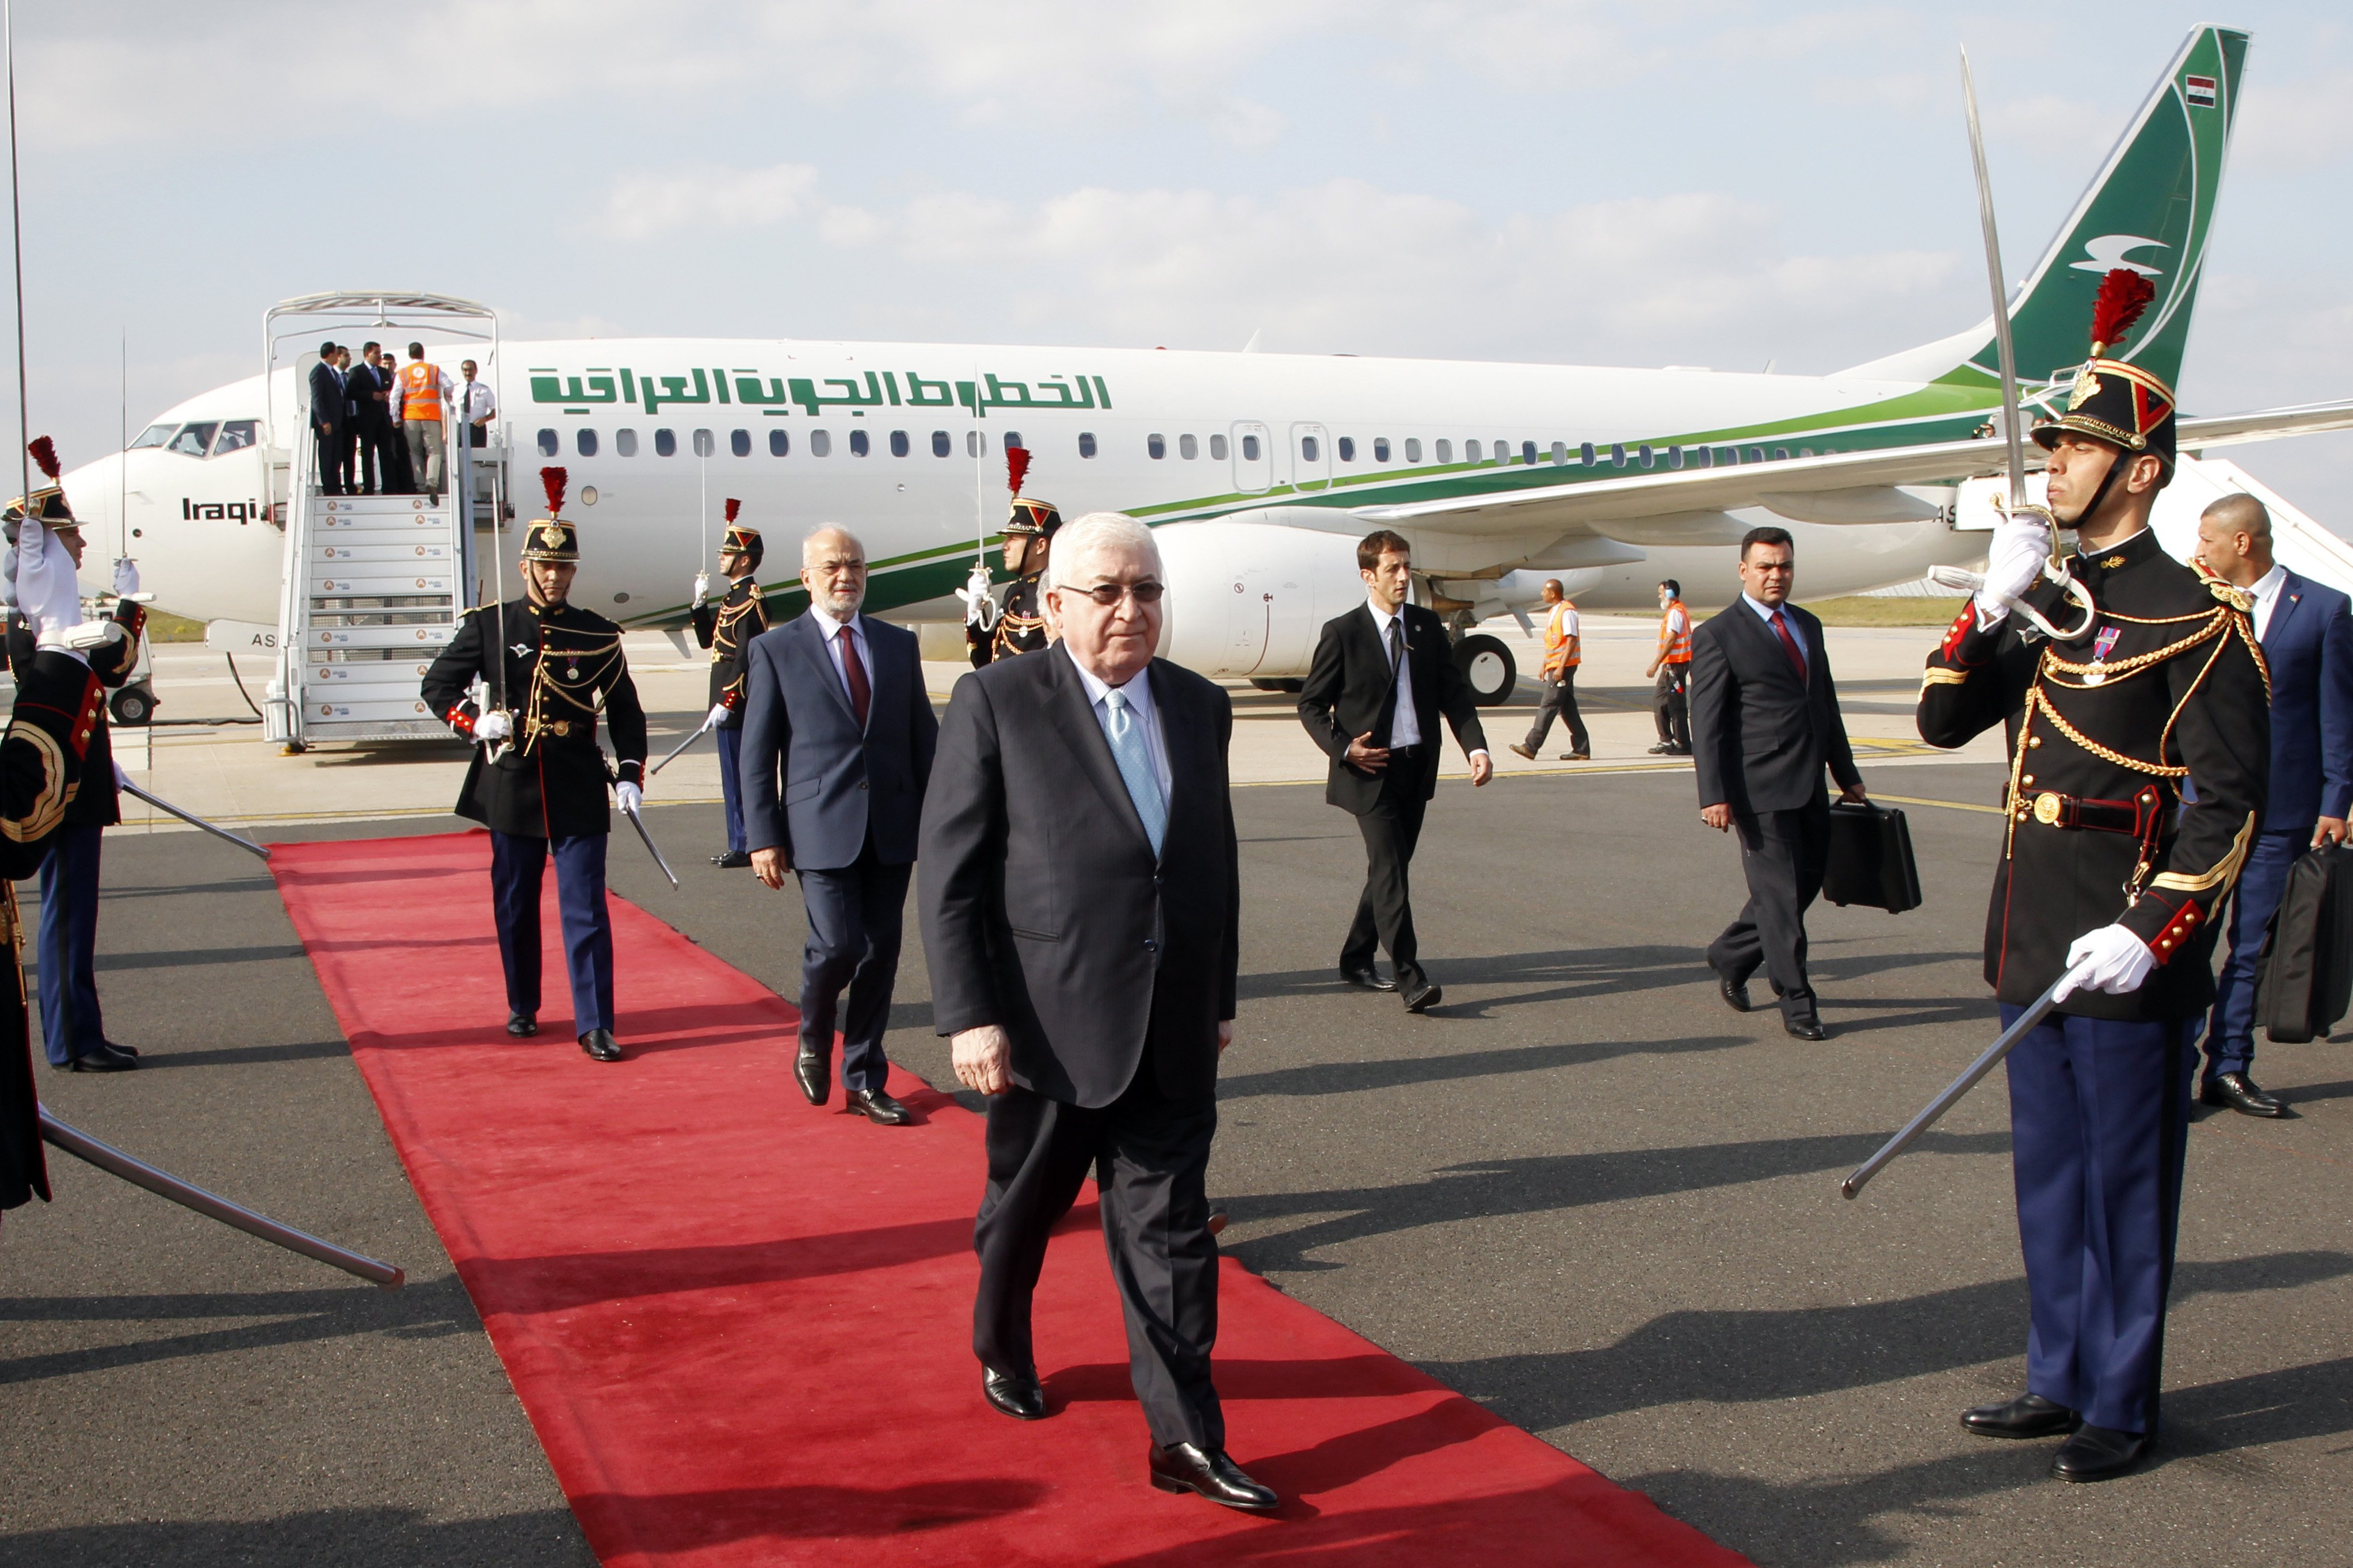 Iraq President Fouad Massoum, center, followed by Iraq Foreign Minister Ibrahim Al-Jaafari, left, arrive with Iraqi officials at Orly airport south of Paris, on Sept. 14, 2014 . (Francois Mori—AP)